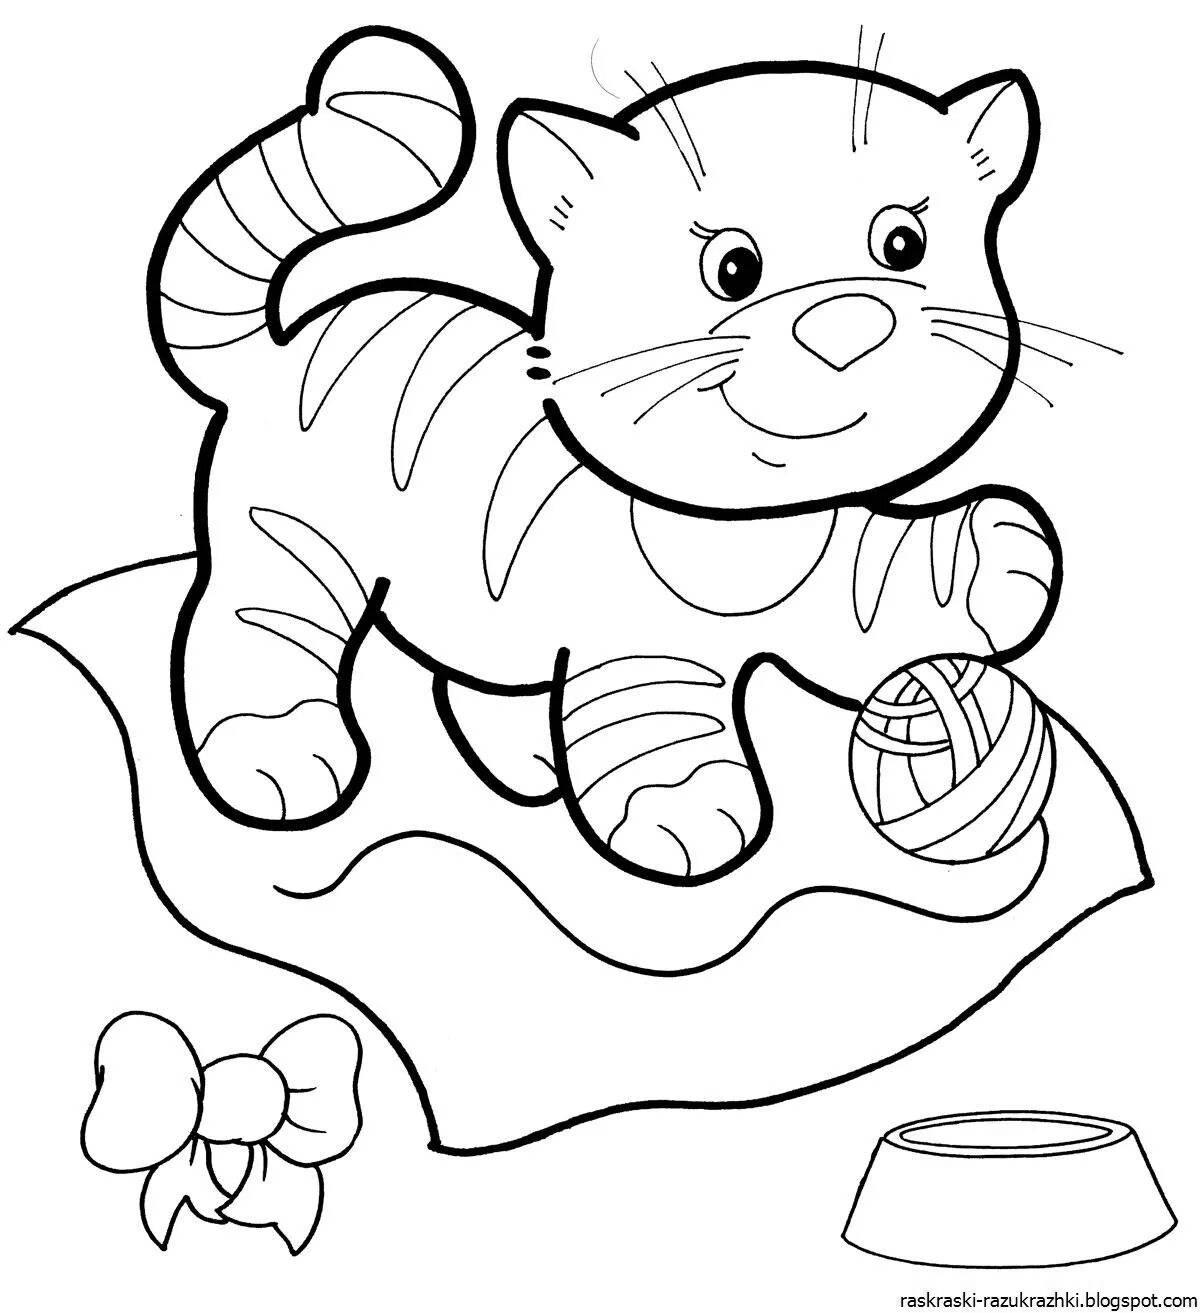 Blissful kitty coloring book for kids 5-6 years old